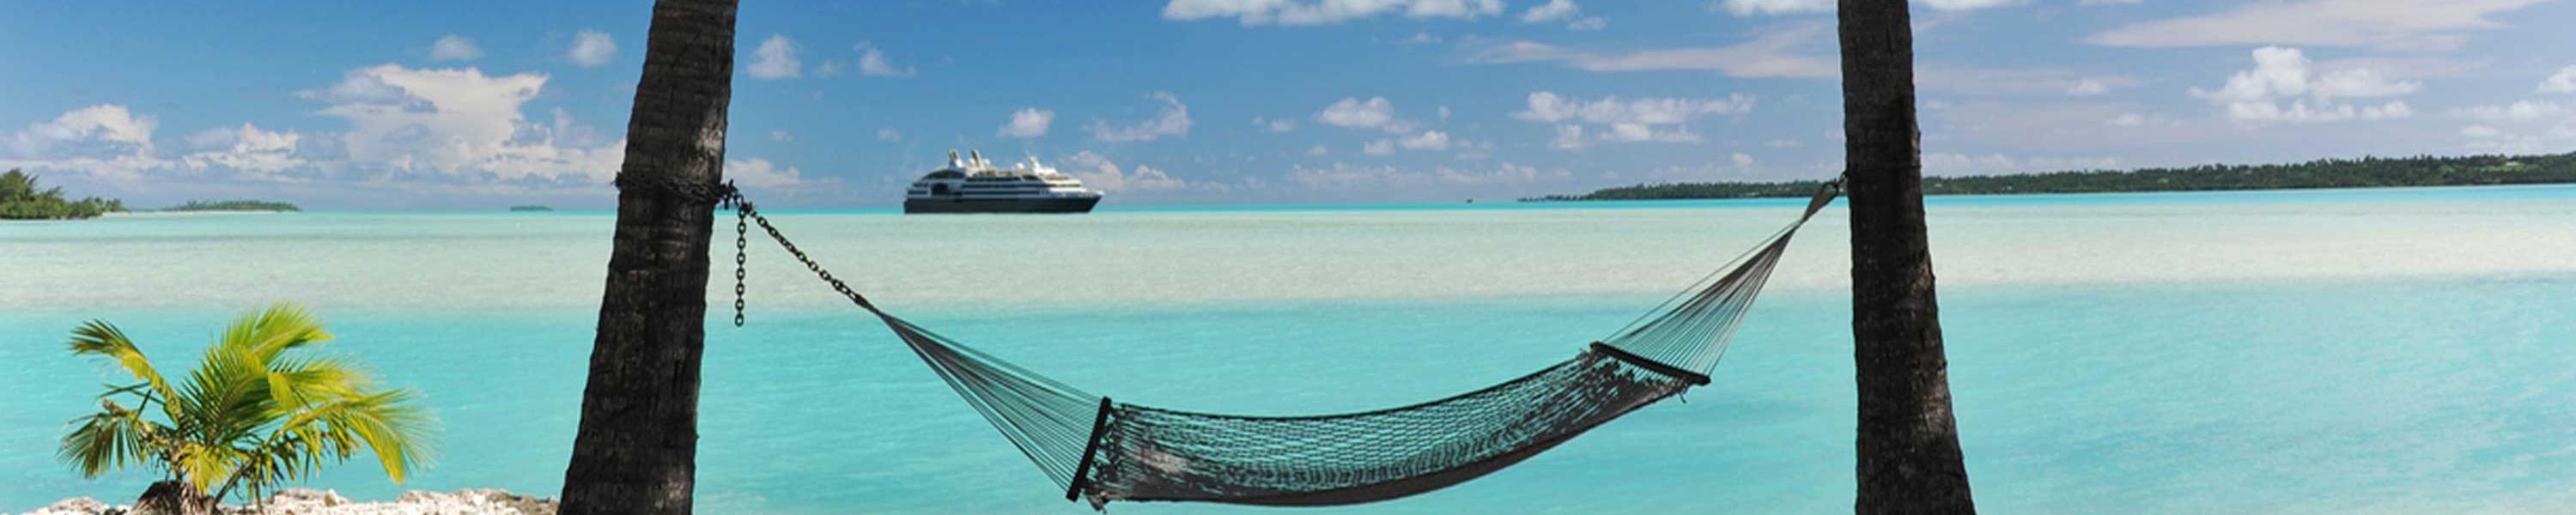 Hammock on the beach with cruise ship off in the distance